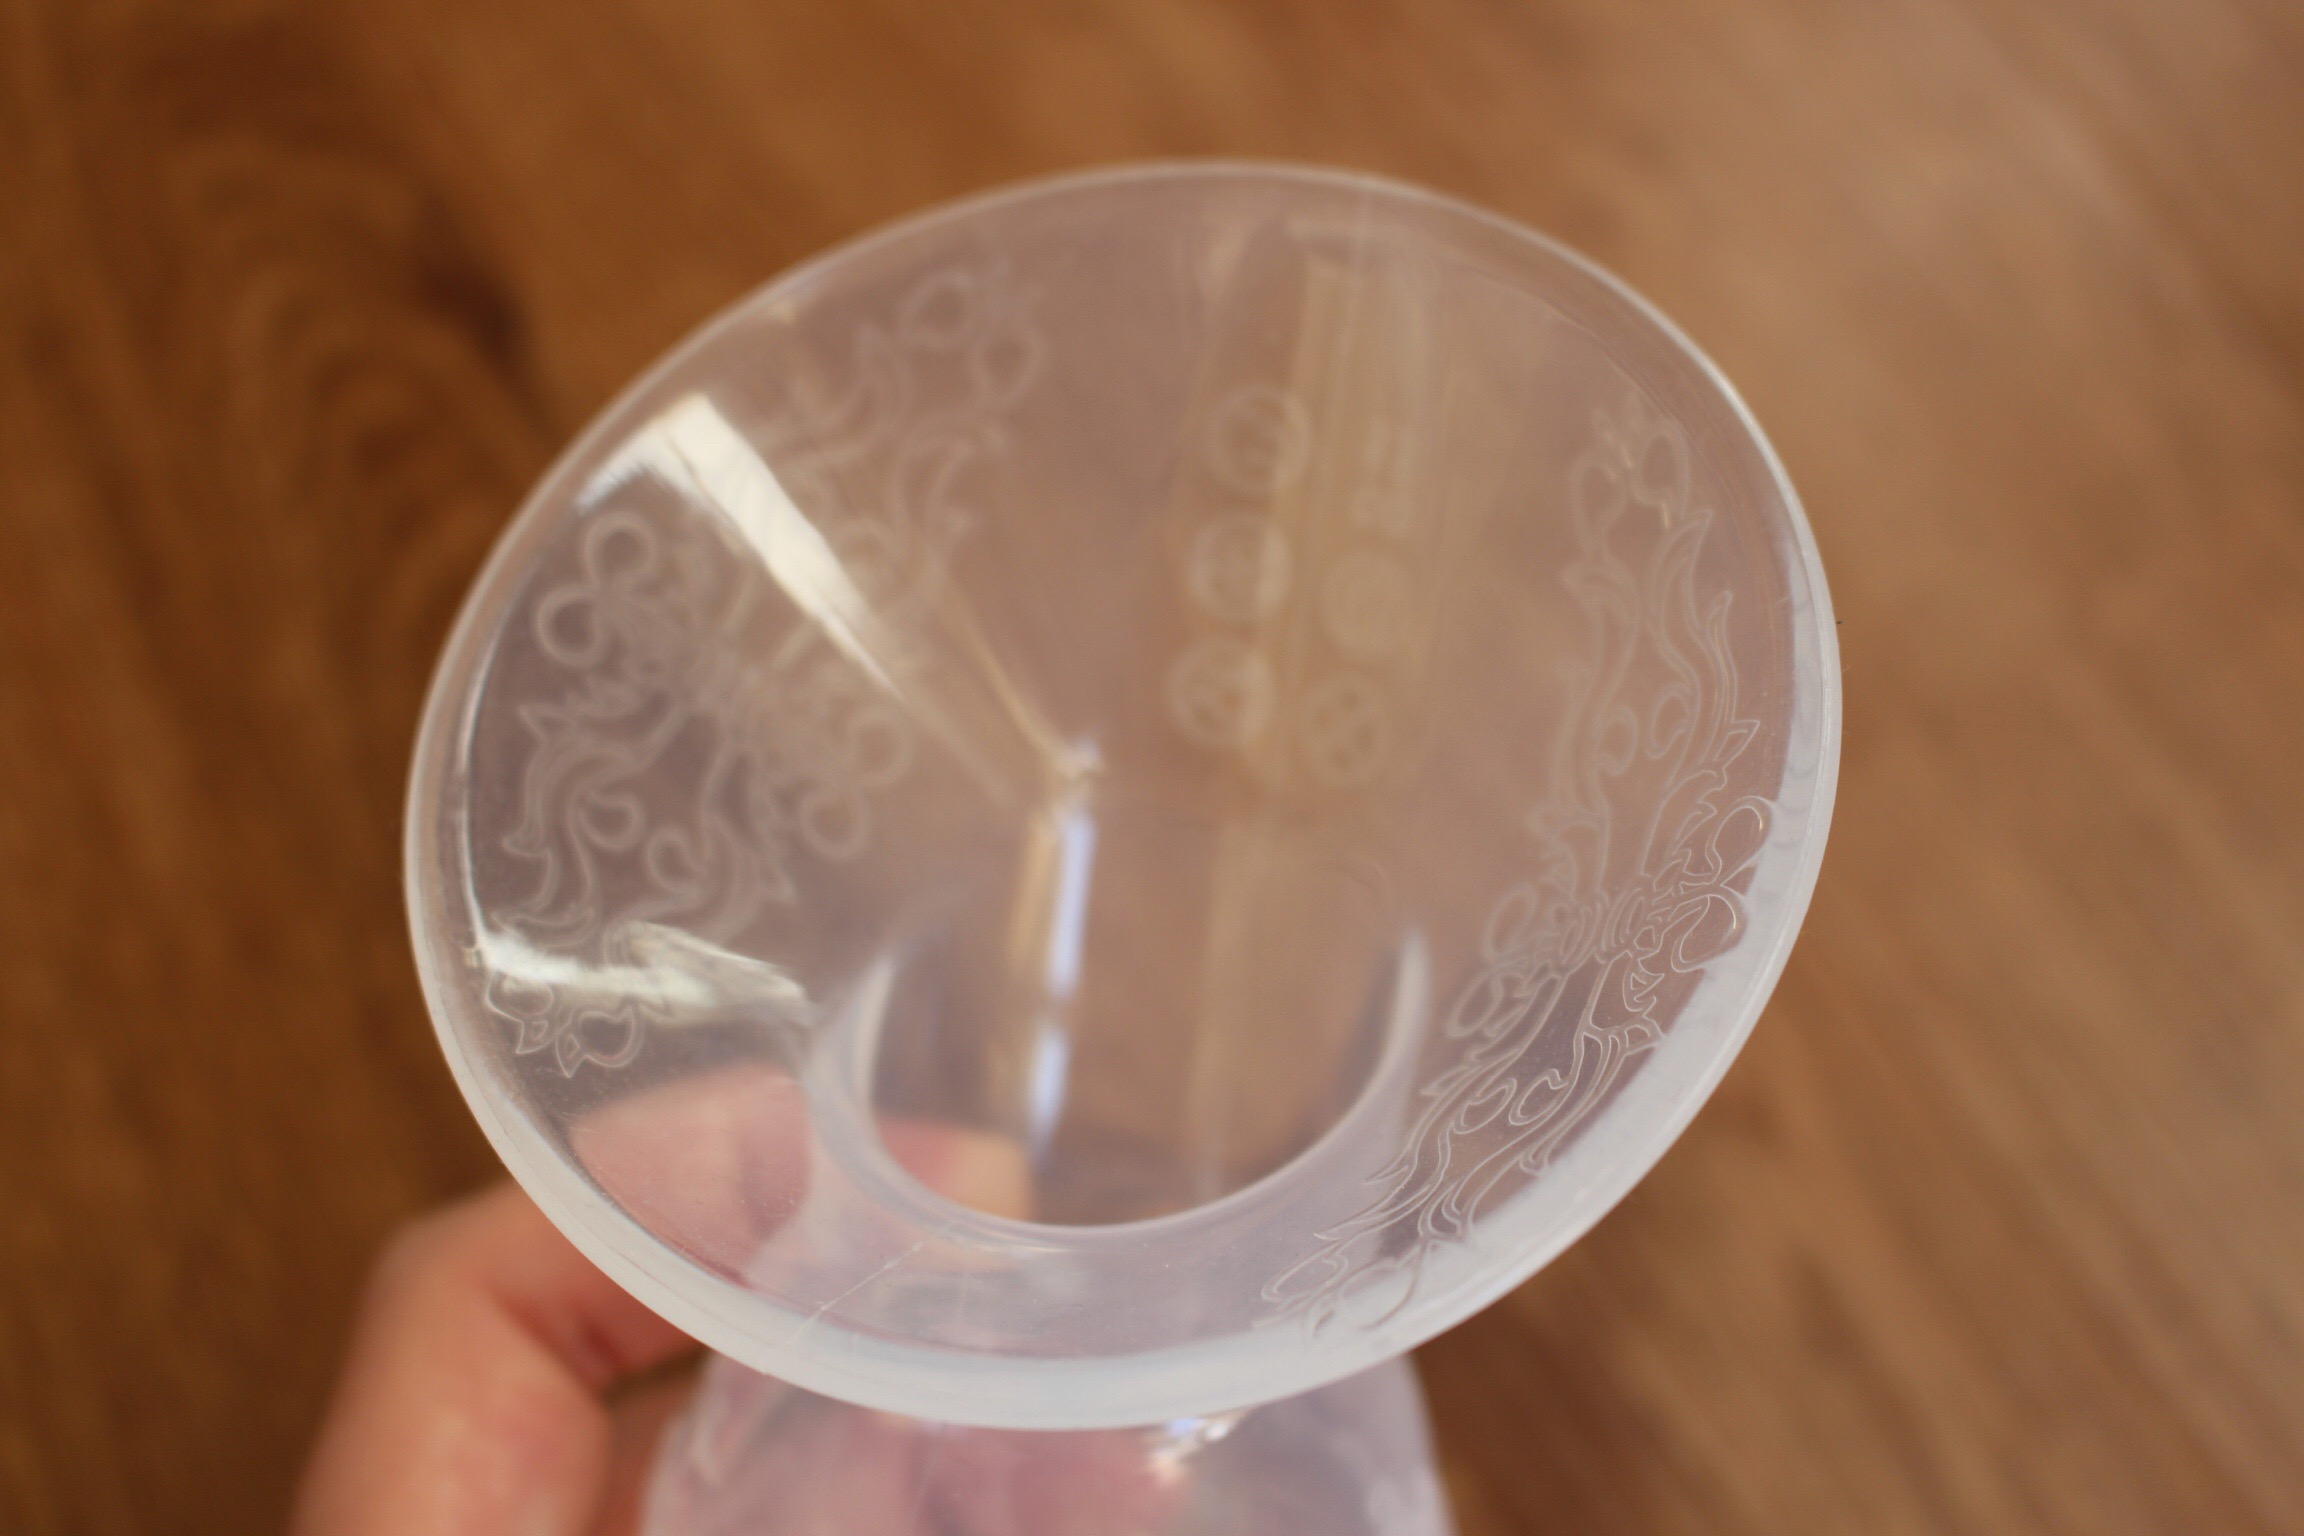 A close up shot of the embossing on the Haakaa Breast Pump lid